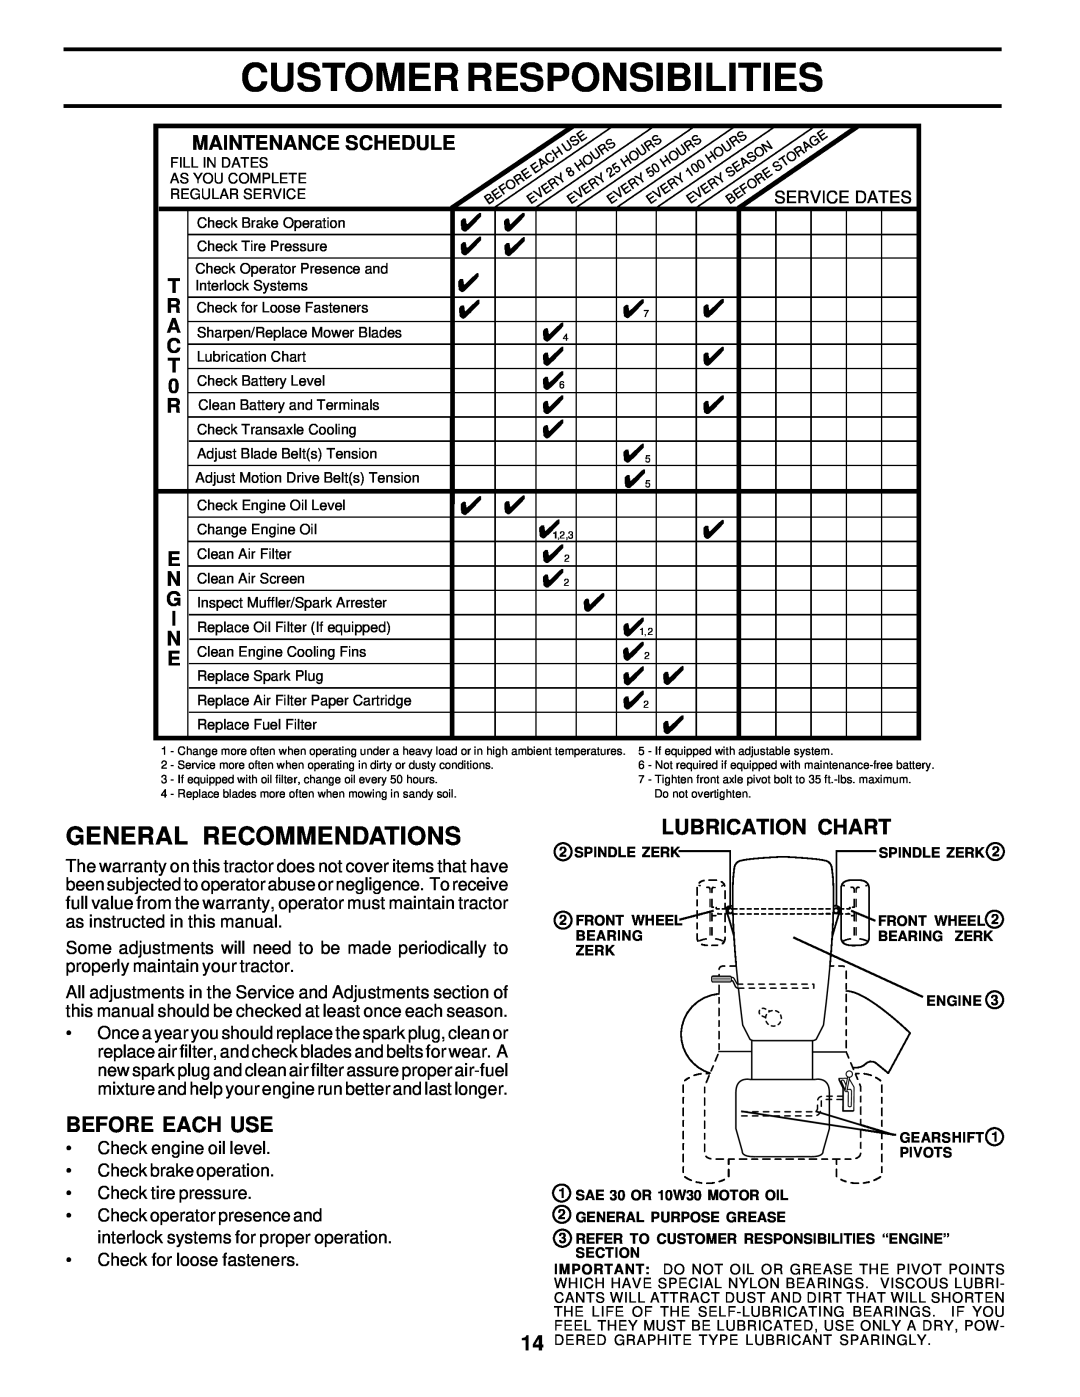 Poulan 177545 Customer Responsibilities, General Recommendations, Lubrication Chart, Before Each Use, Maintenance Schedule 